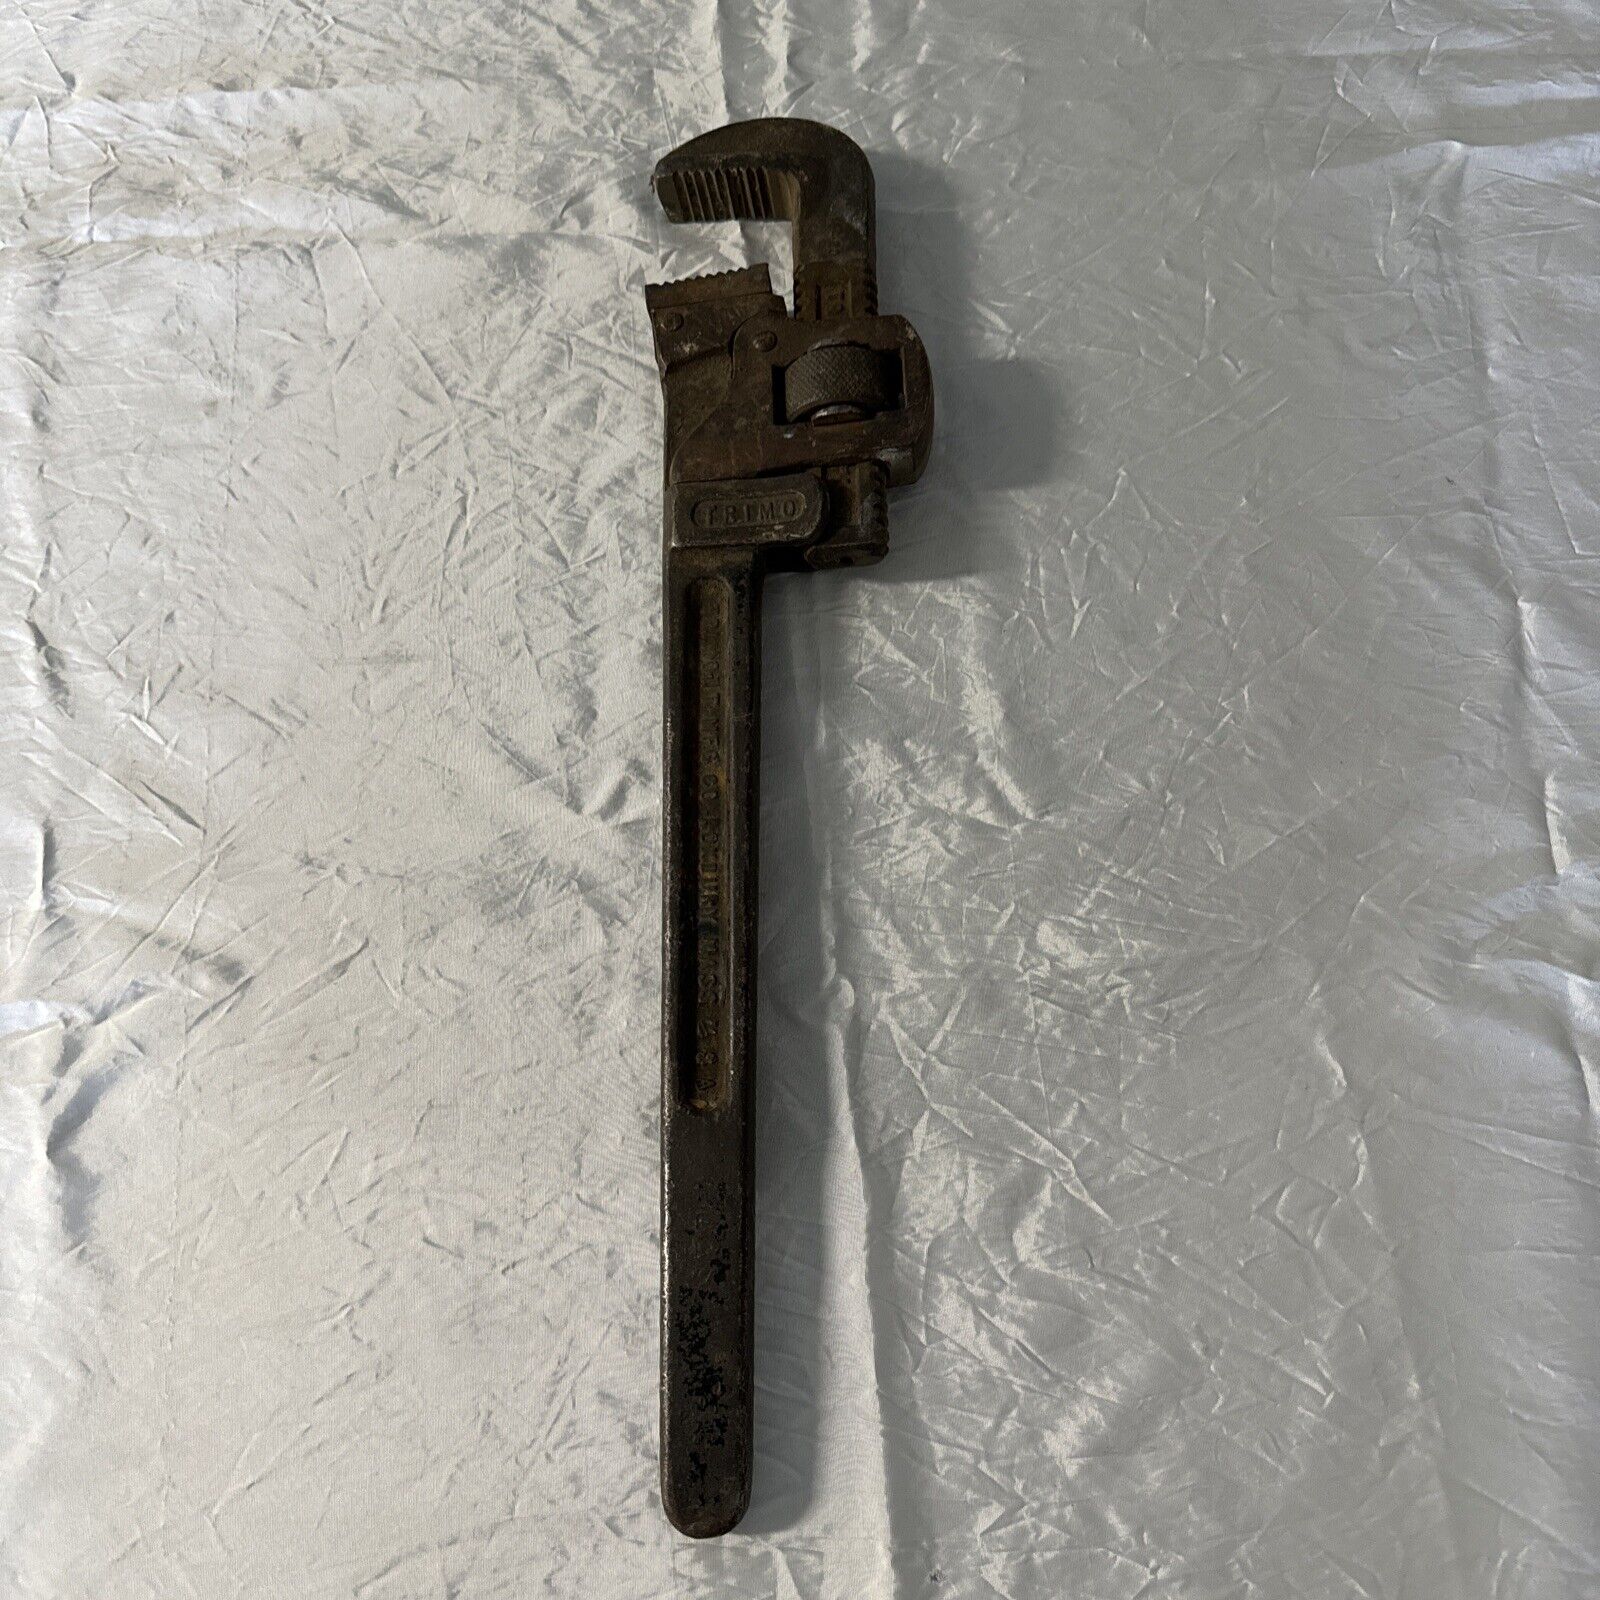 Vtg Trimont Trimo 18 Inch Pipe Wrench Pat'd 6/20/16 